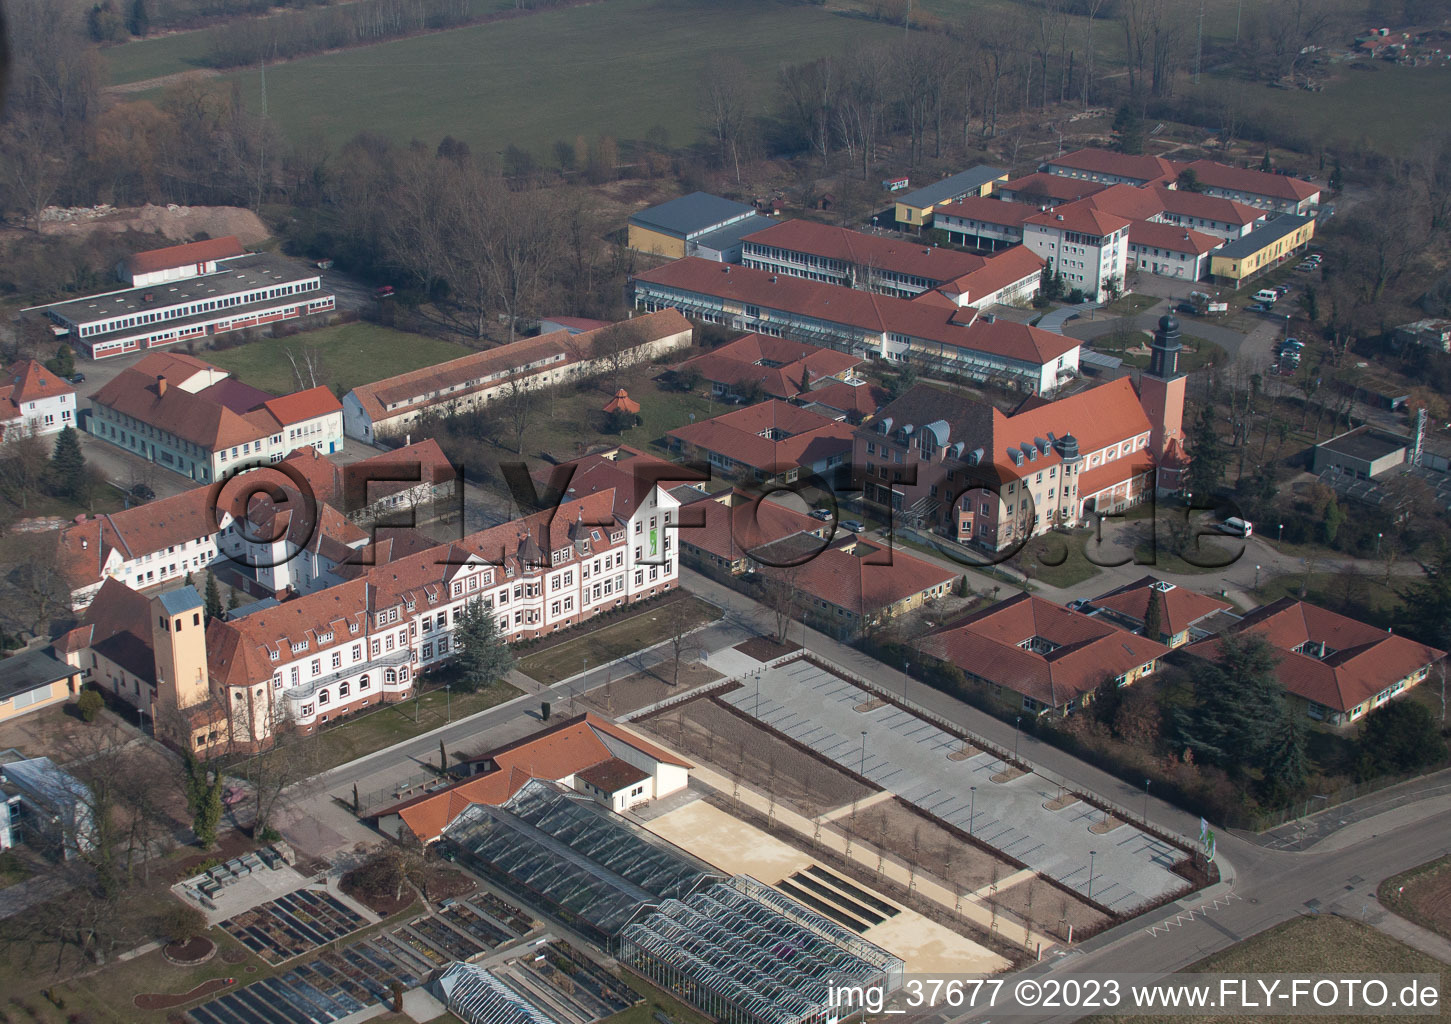 District Queichheim in Landau in der Pfalz in the state Rhineland-Palatinate, Germany from the drone perspective